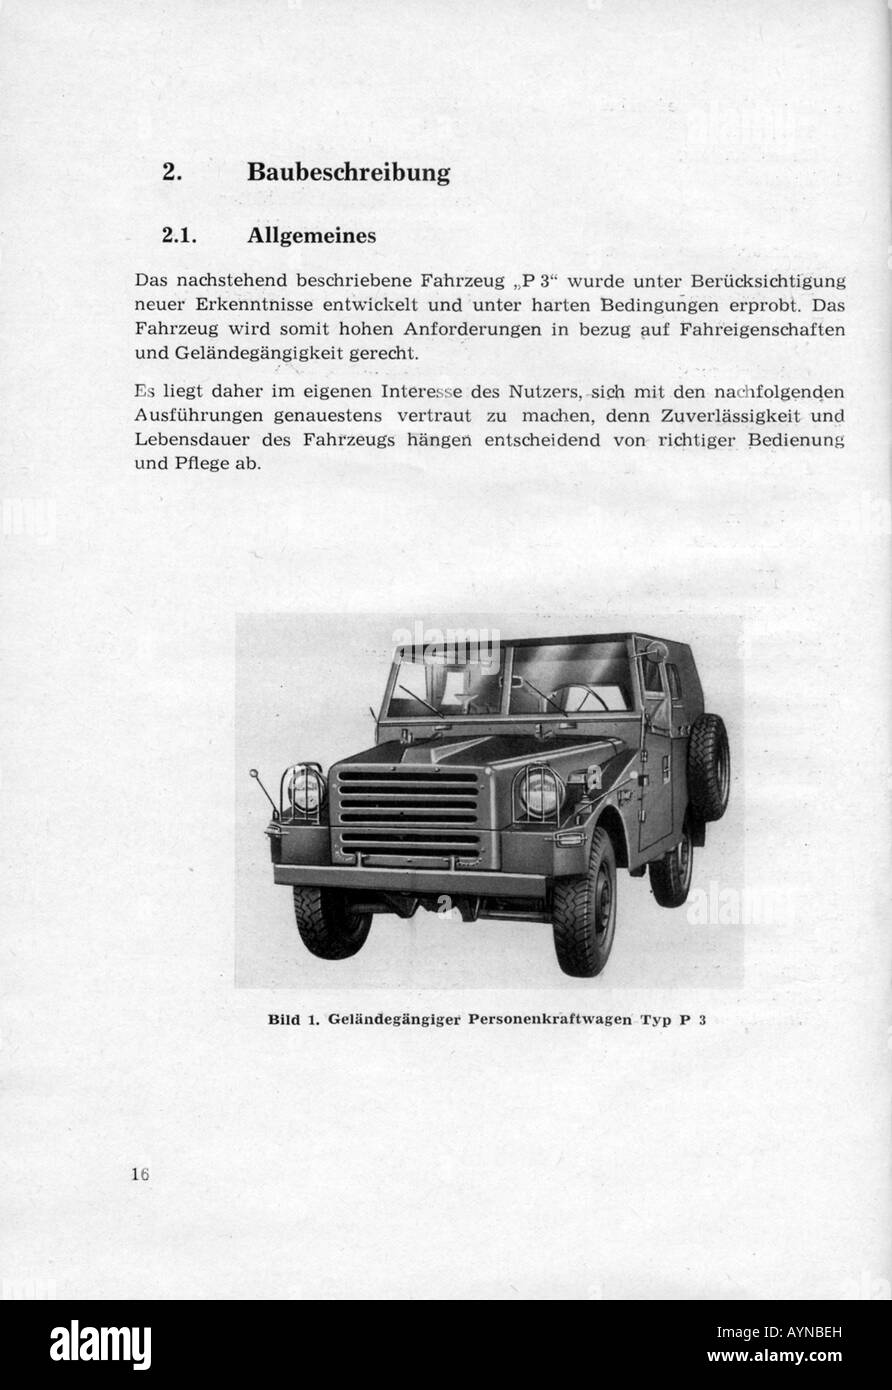 documents, operating instructions, manual of military off-road vehicle P 3, editor: VEB Kooperationszentrale Automobilbau Karl-Marx-Stadt, GDR, 1962, historic, historical, 20th century, 1960s, car, instruction, book, DDR, East Germany, page, Stock Photo